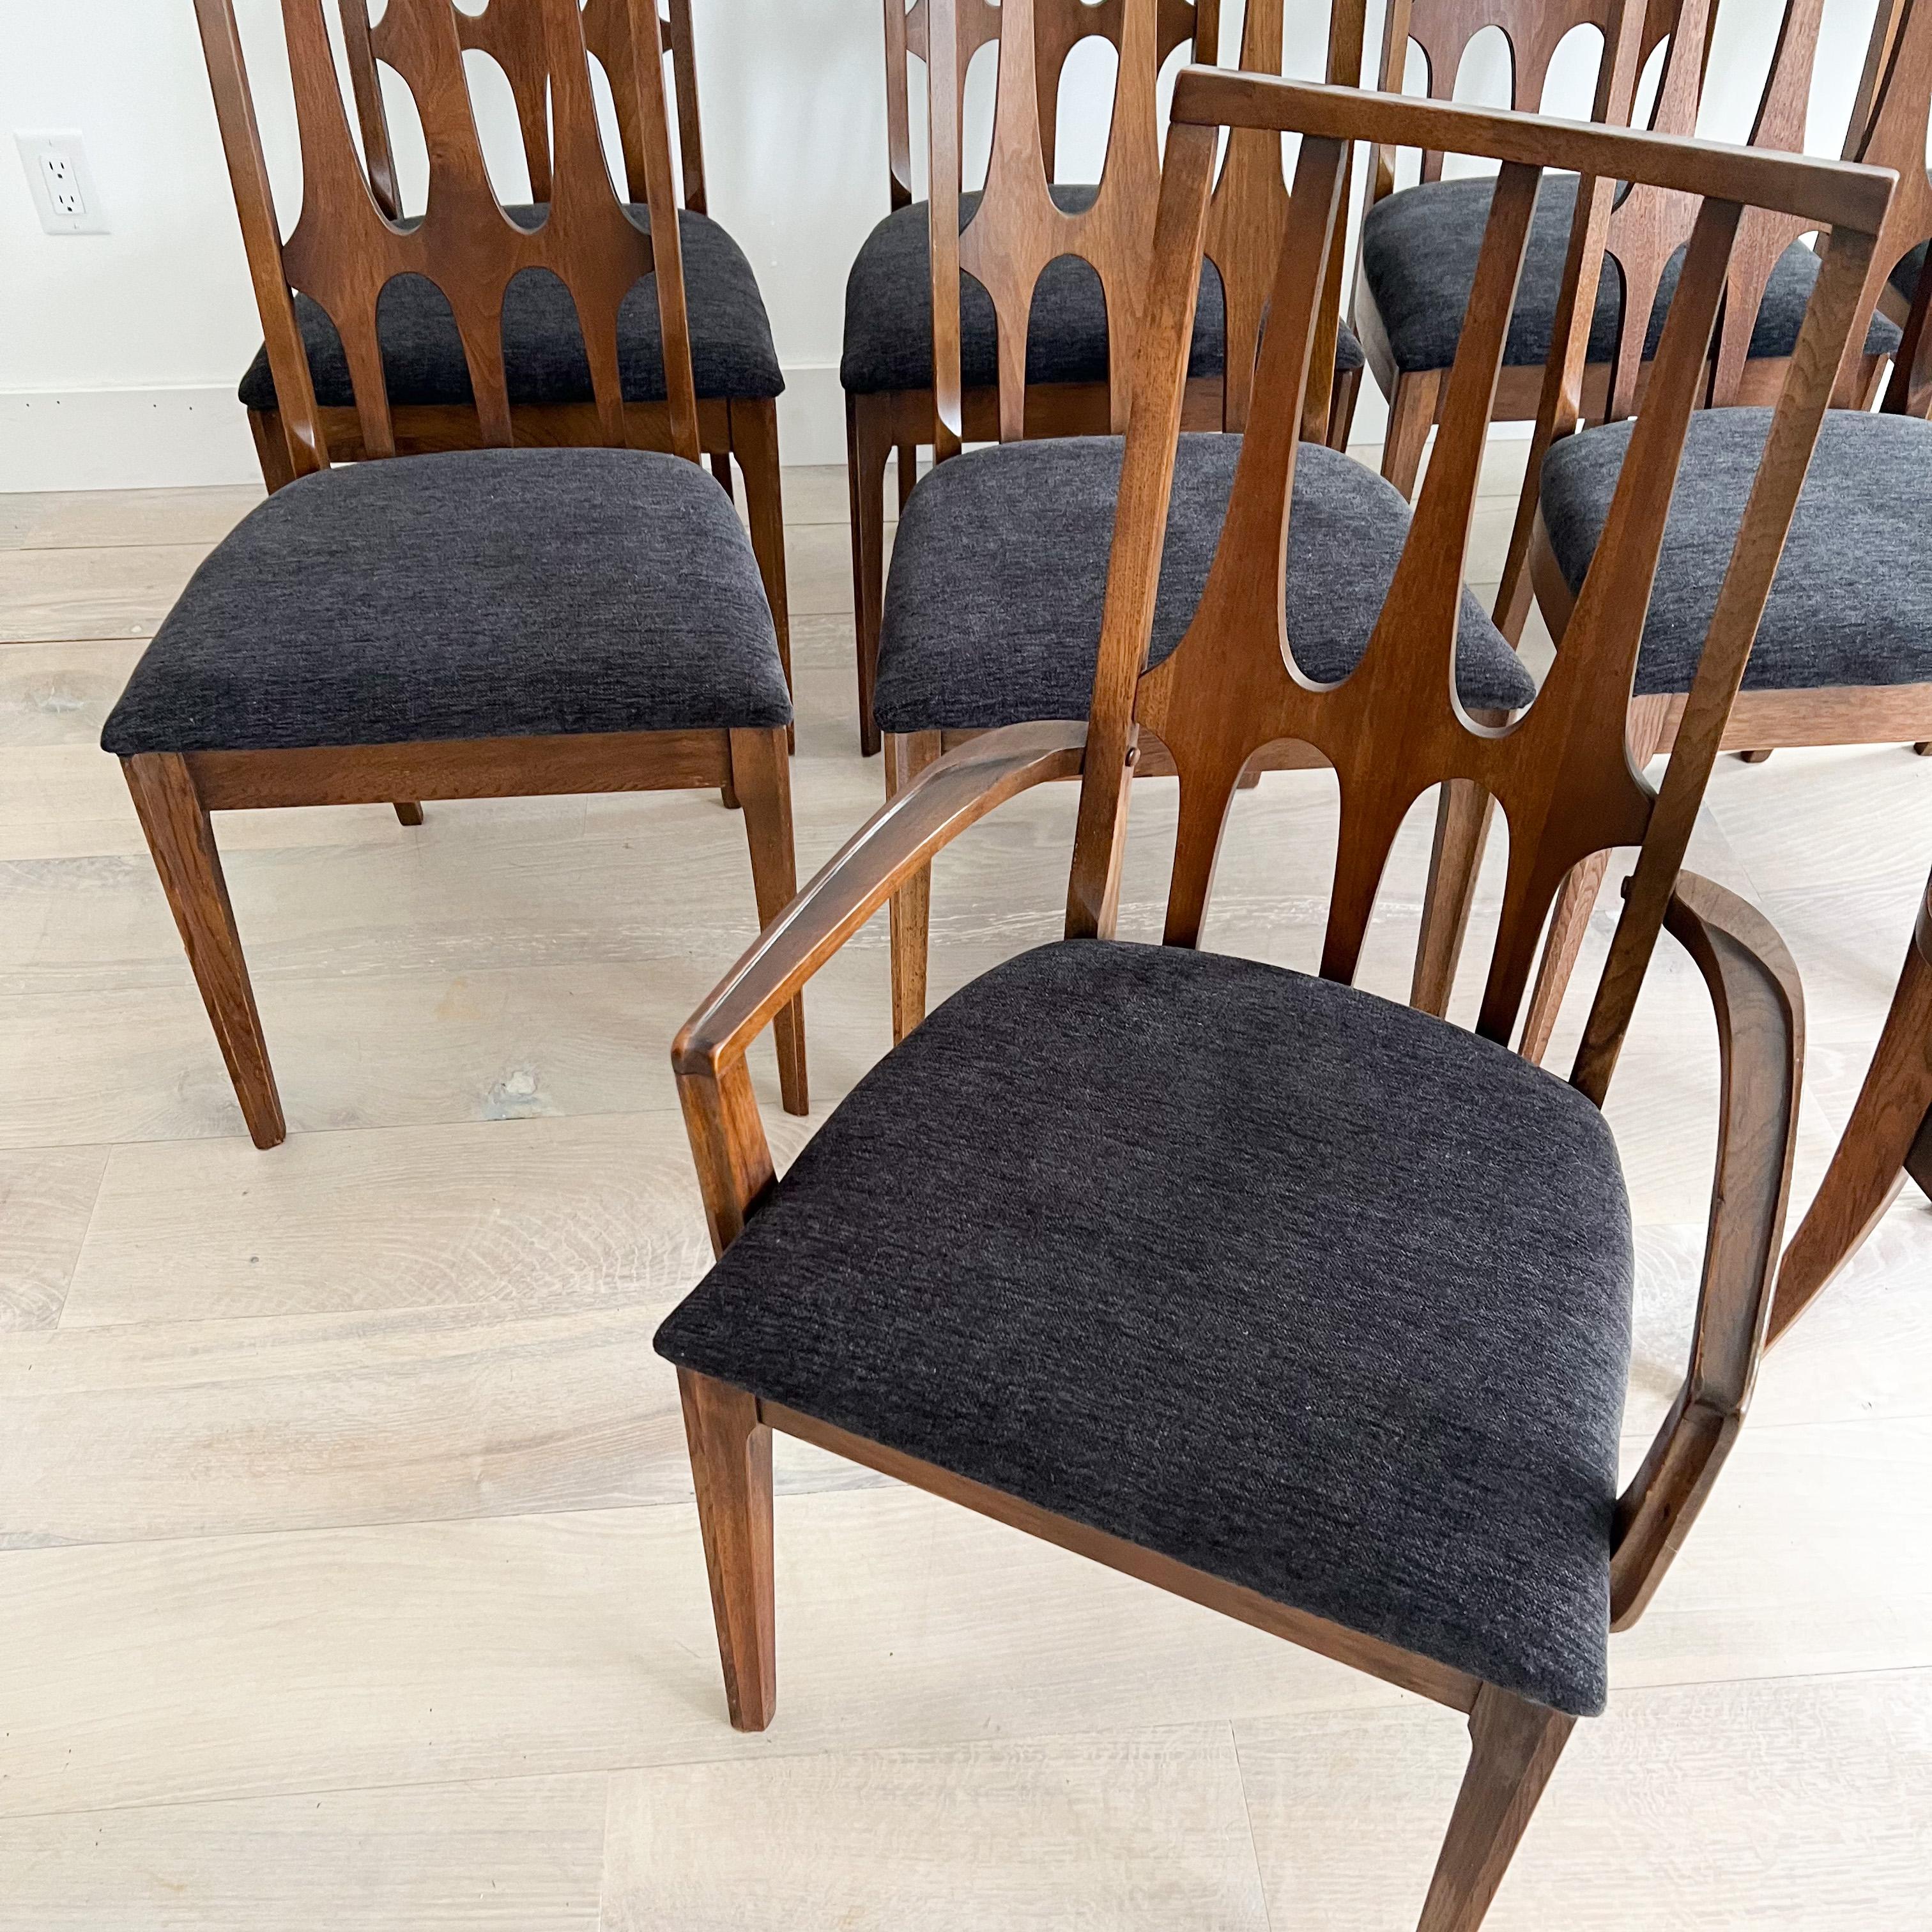 Set of 10 Mid-Century Modern Broyhill Brasilia Dining Chairs W/ New Upholstery 6